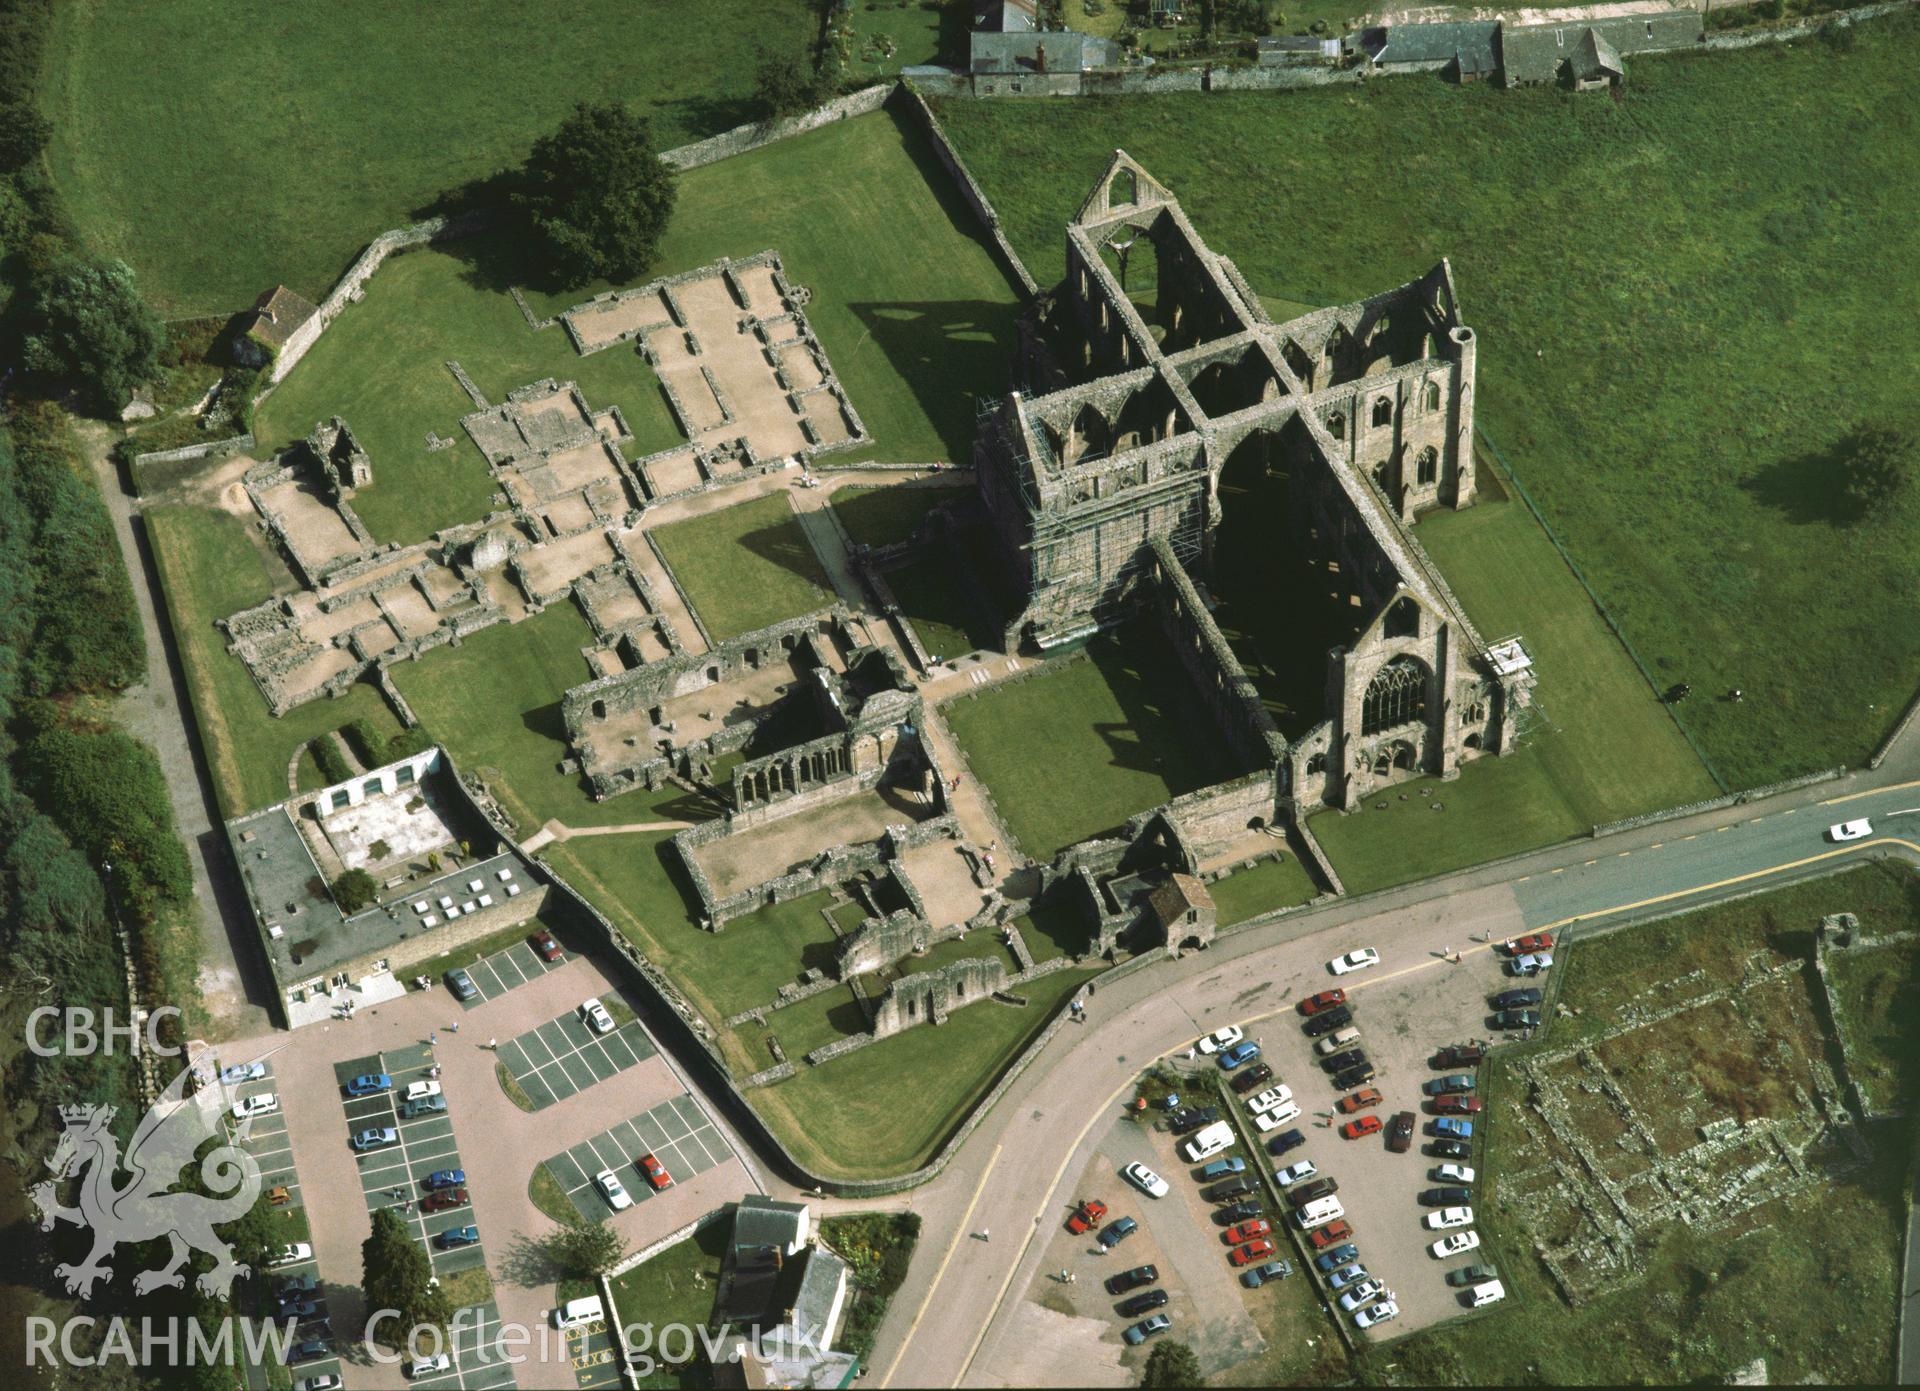 RCAHMW colour oblique aerial photograph of Tintern Abbey, taken by C.R. Musson, 18/07/94